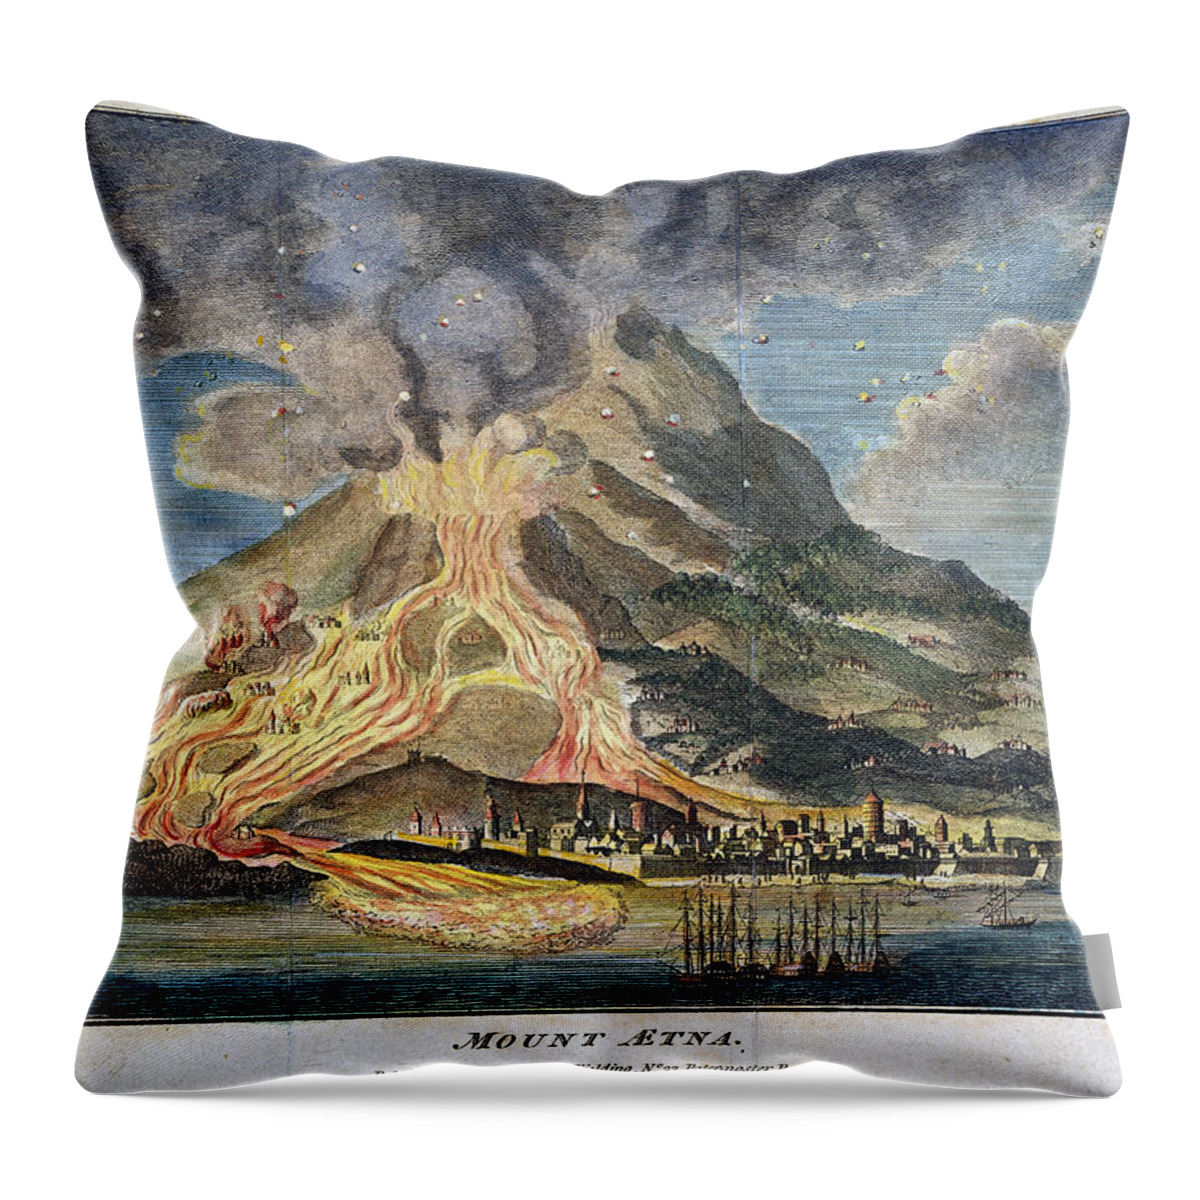 1783 Throw Pillow featuring the photograph Volcano: Mt. Etna by Granger